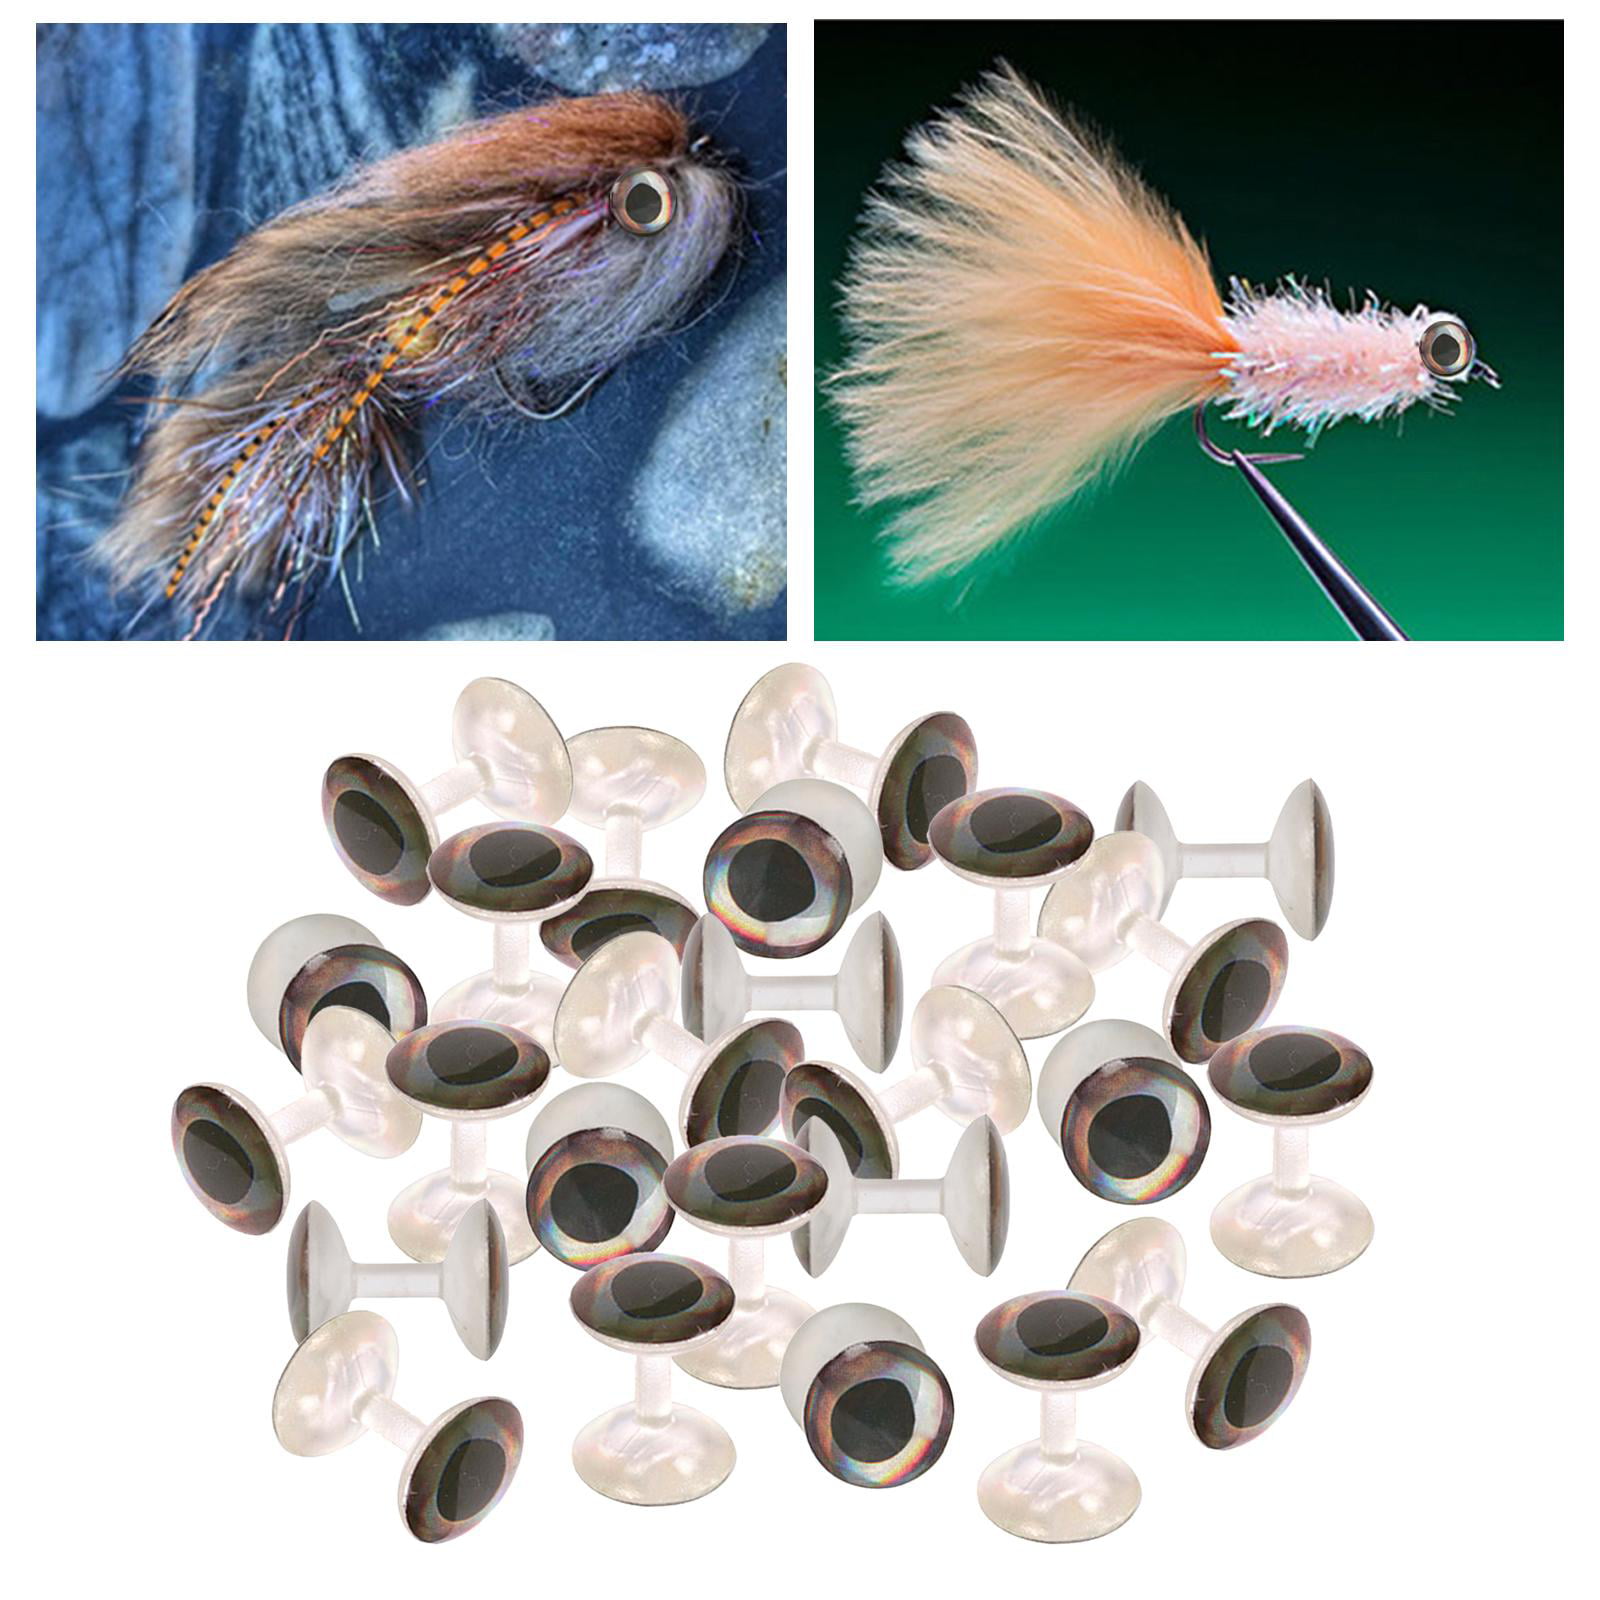 Solid Plastic Eyes, Fly Tying - Beads, Eyes, Weights